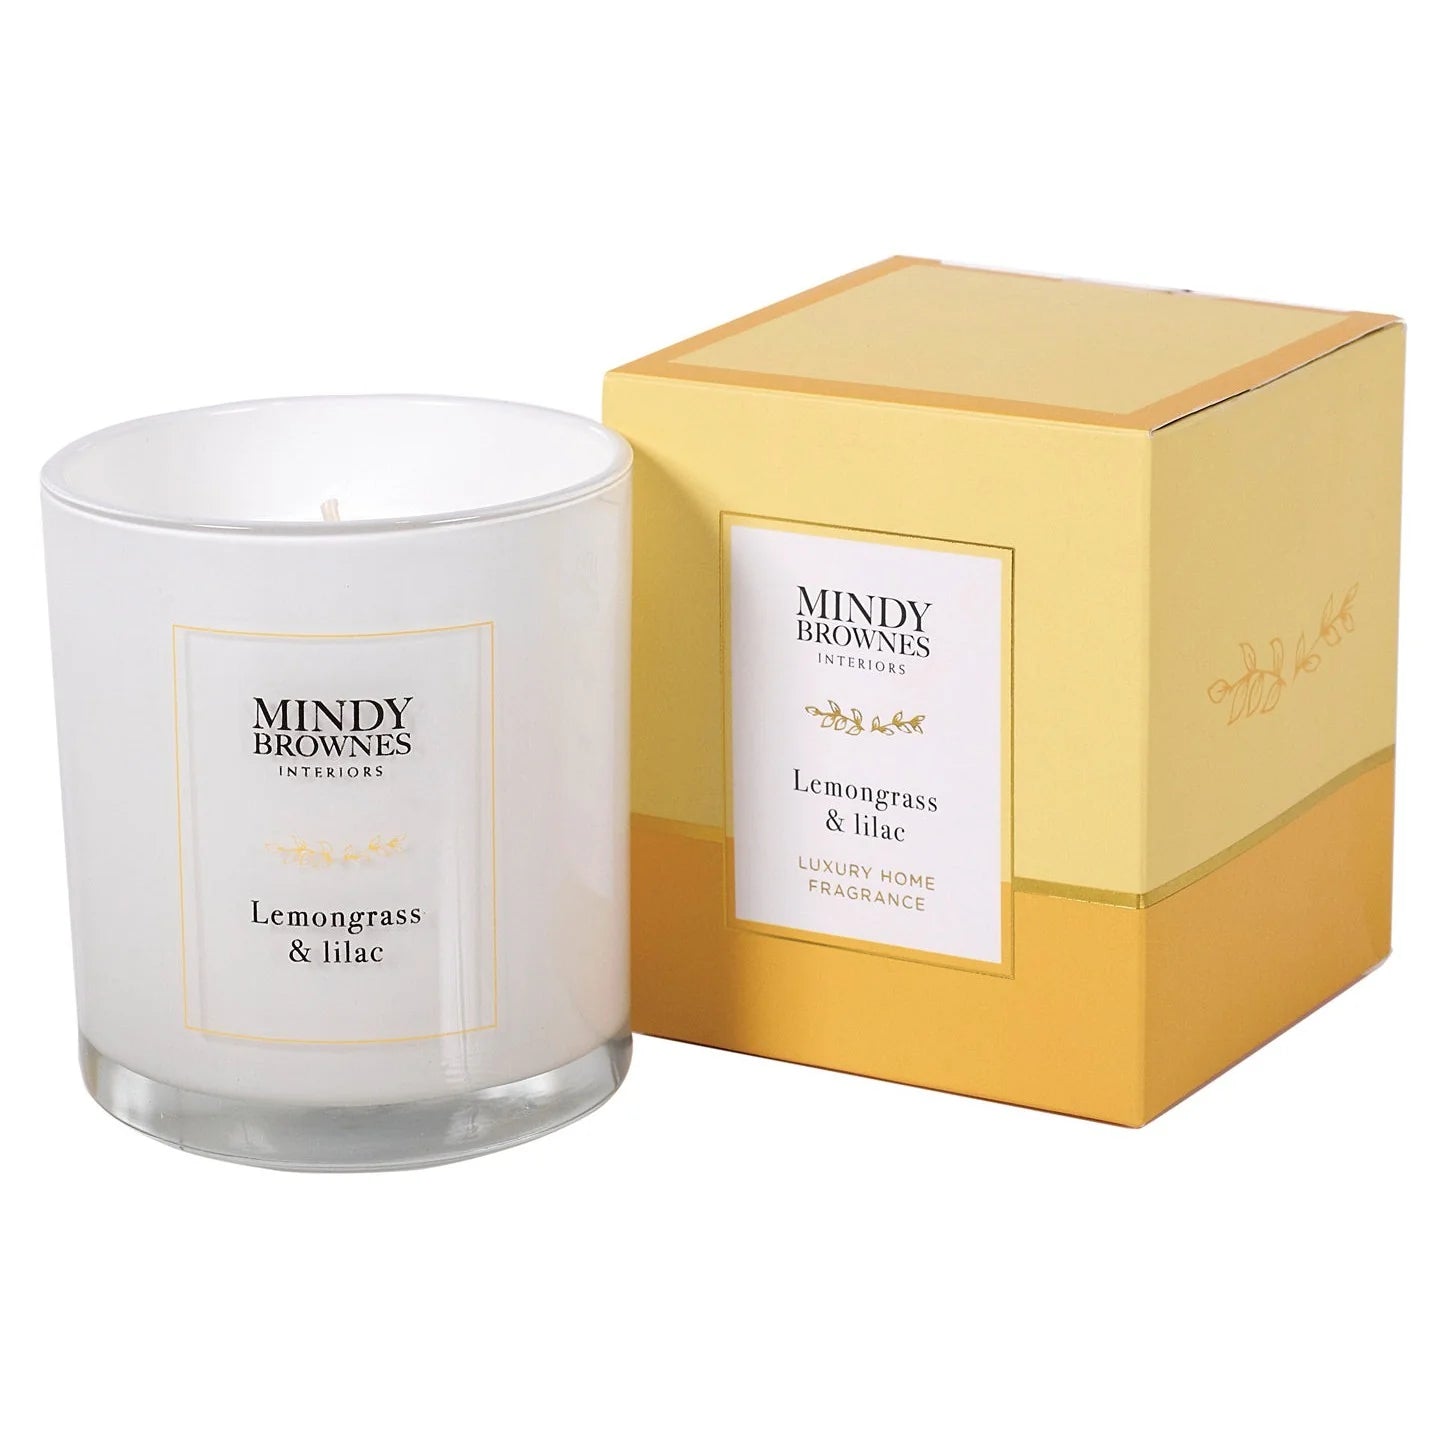 Mindy Brownes Scented Candles - Lemongrass & Lilac